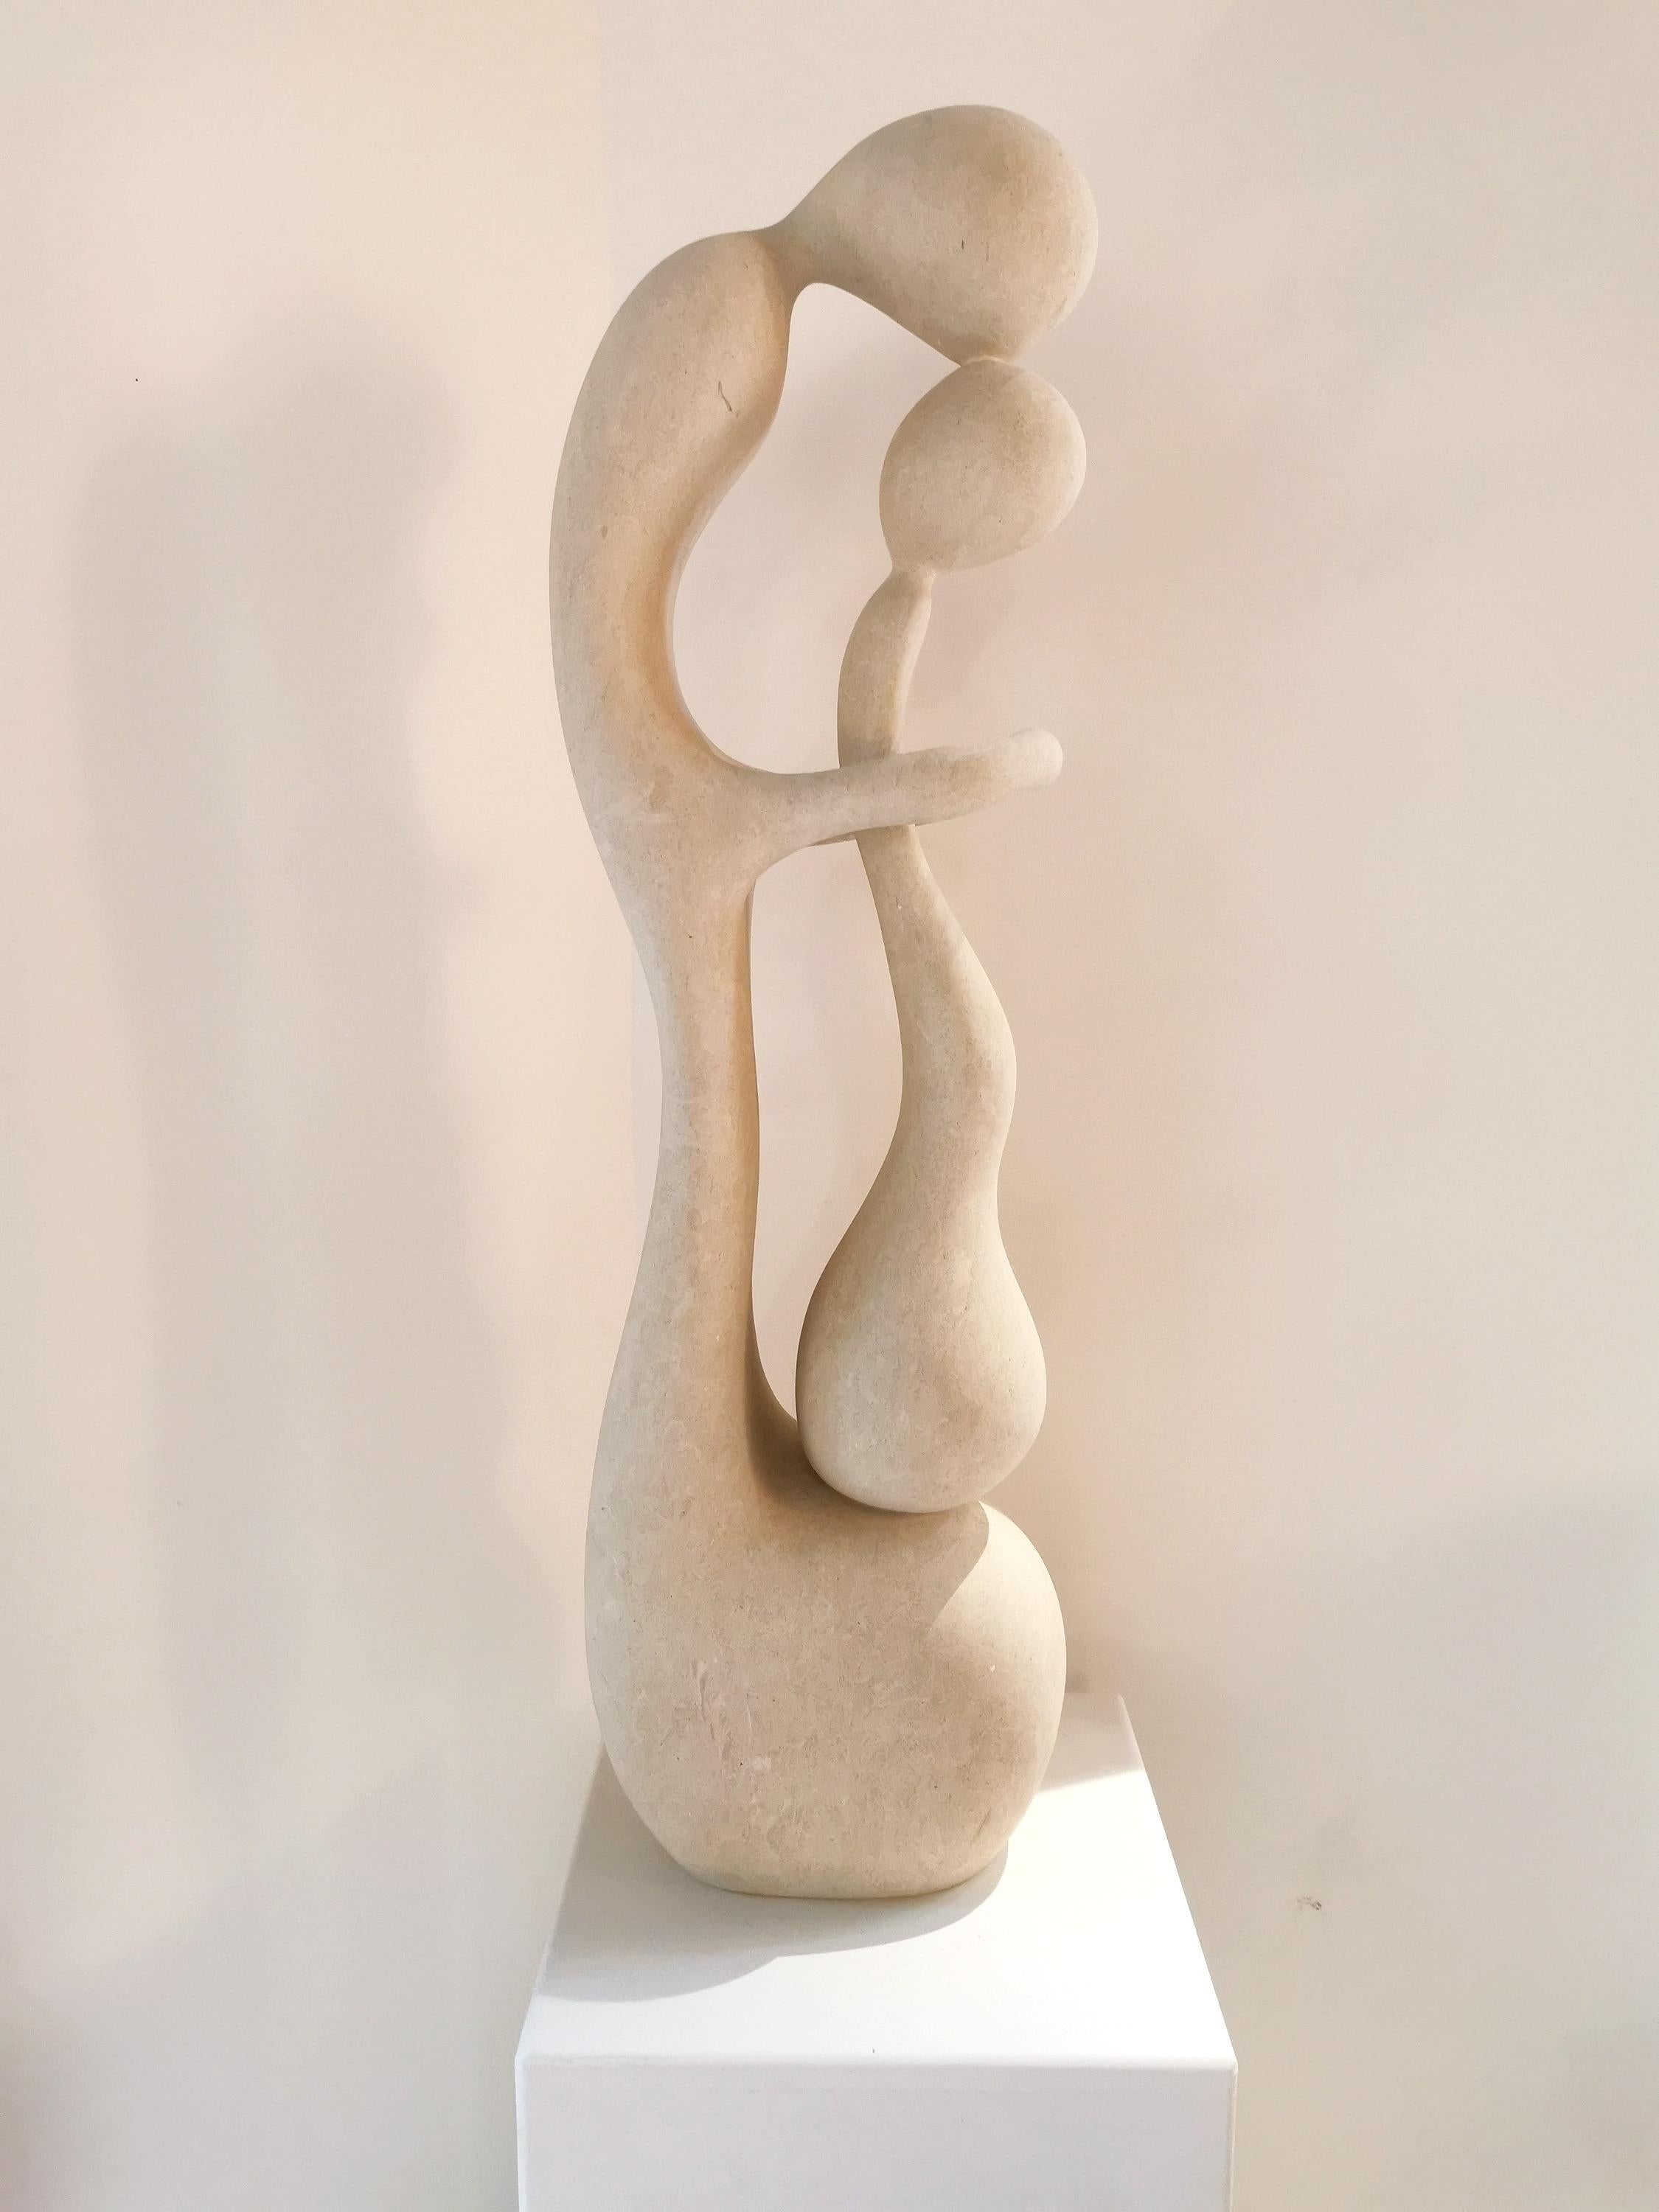 21st century abstract sculpture Amplexus by Renzo Buttazzo from Italy

Sculpture in Lecce Stone
Delivered with a certificate of authenticity (dated / numbered / signed)
Contact us on 1stDibs to acquire a different size than the one shown here (80 x